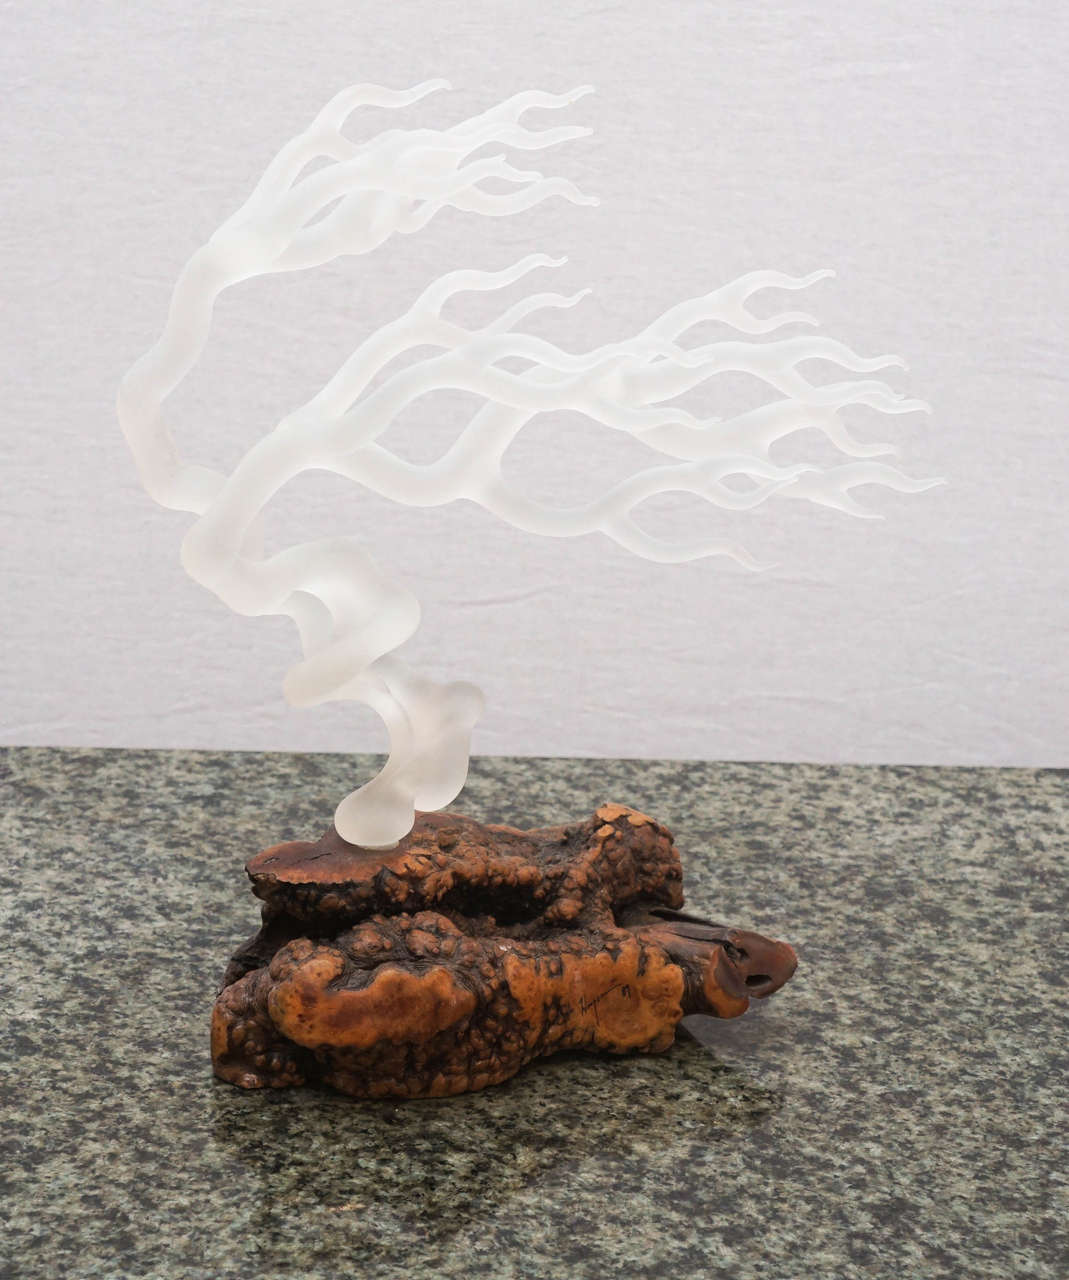 Elegant frosted glass tree sculpture with a root base.